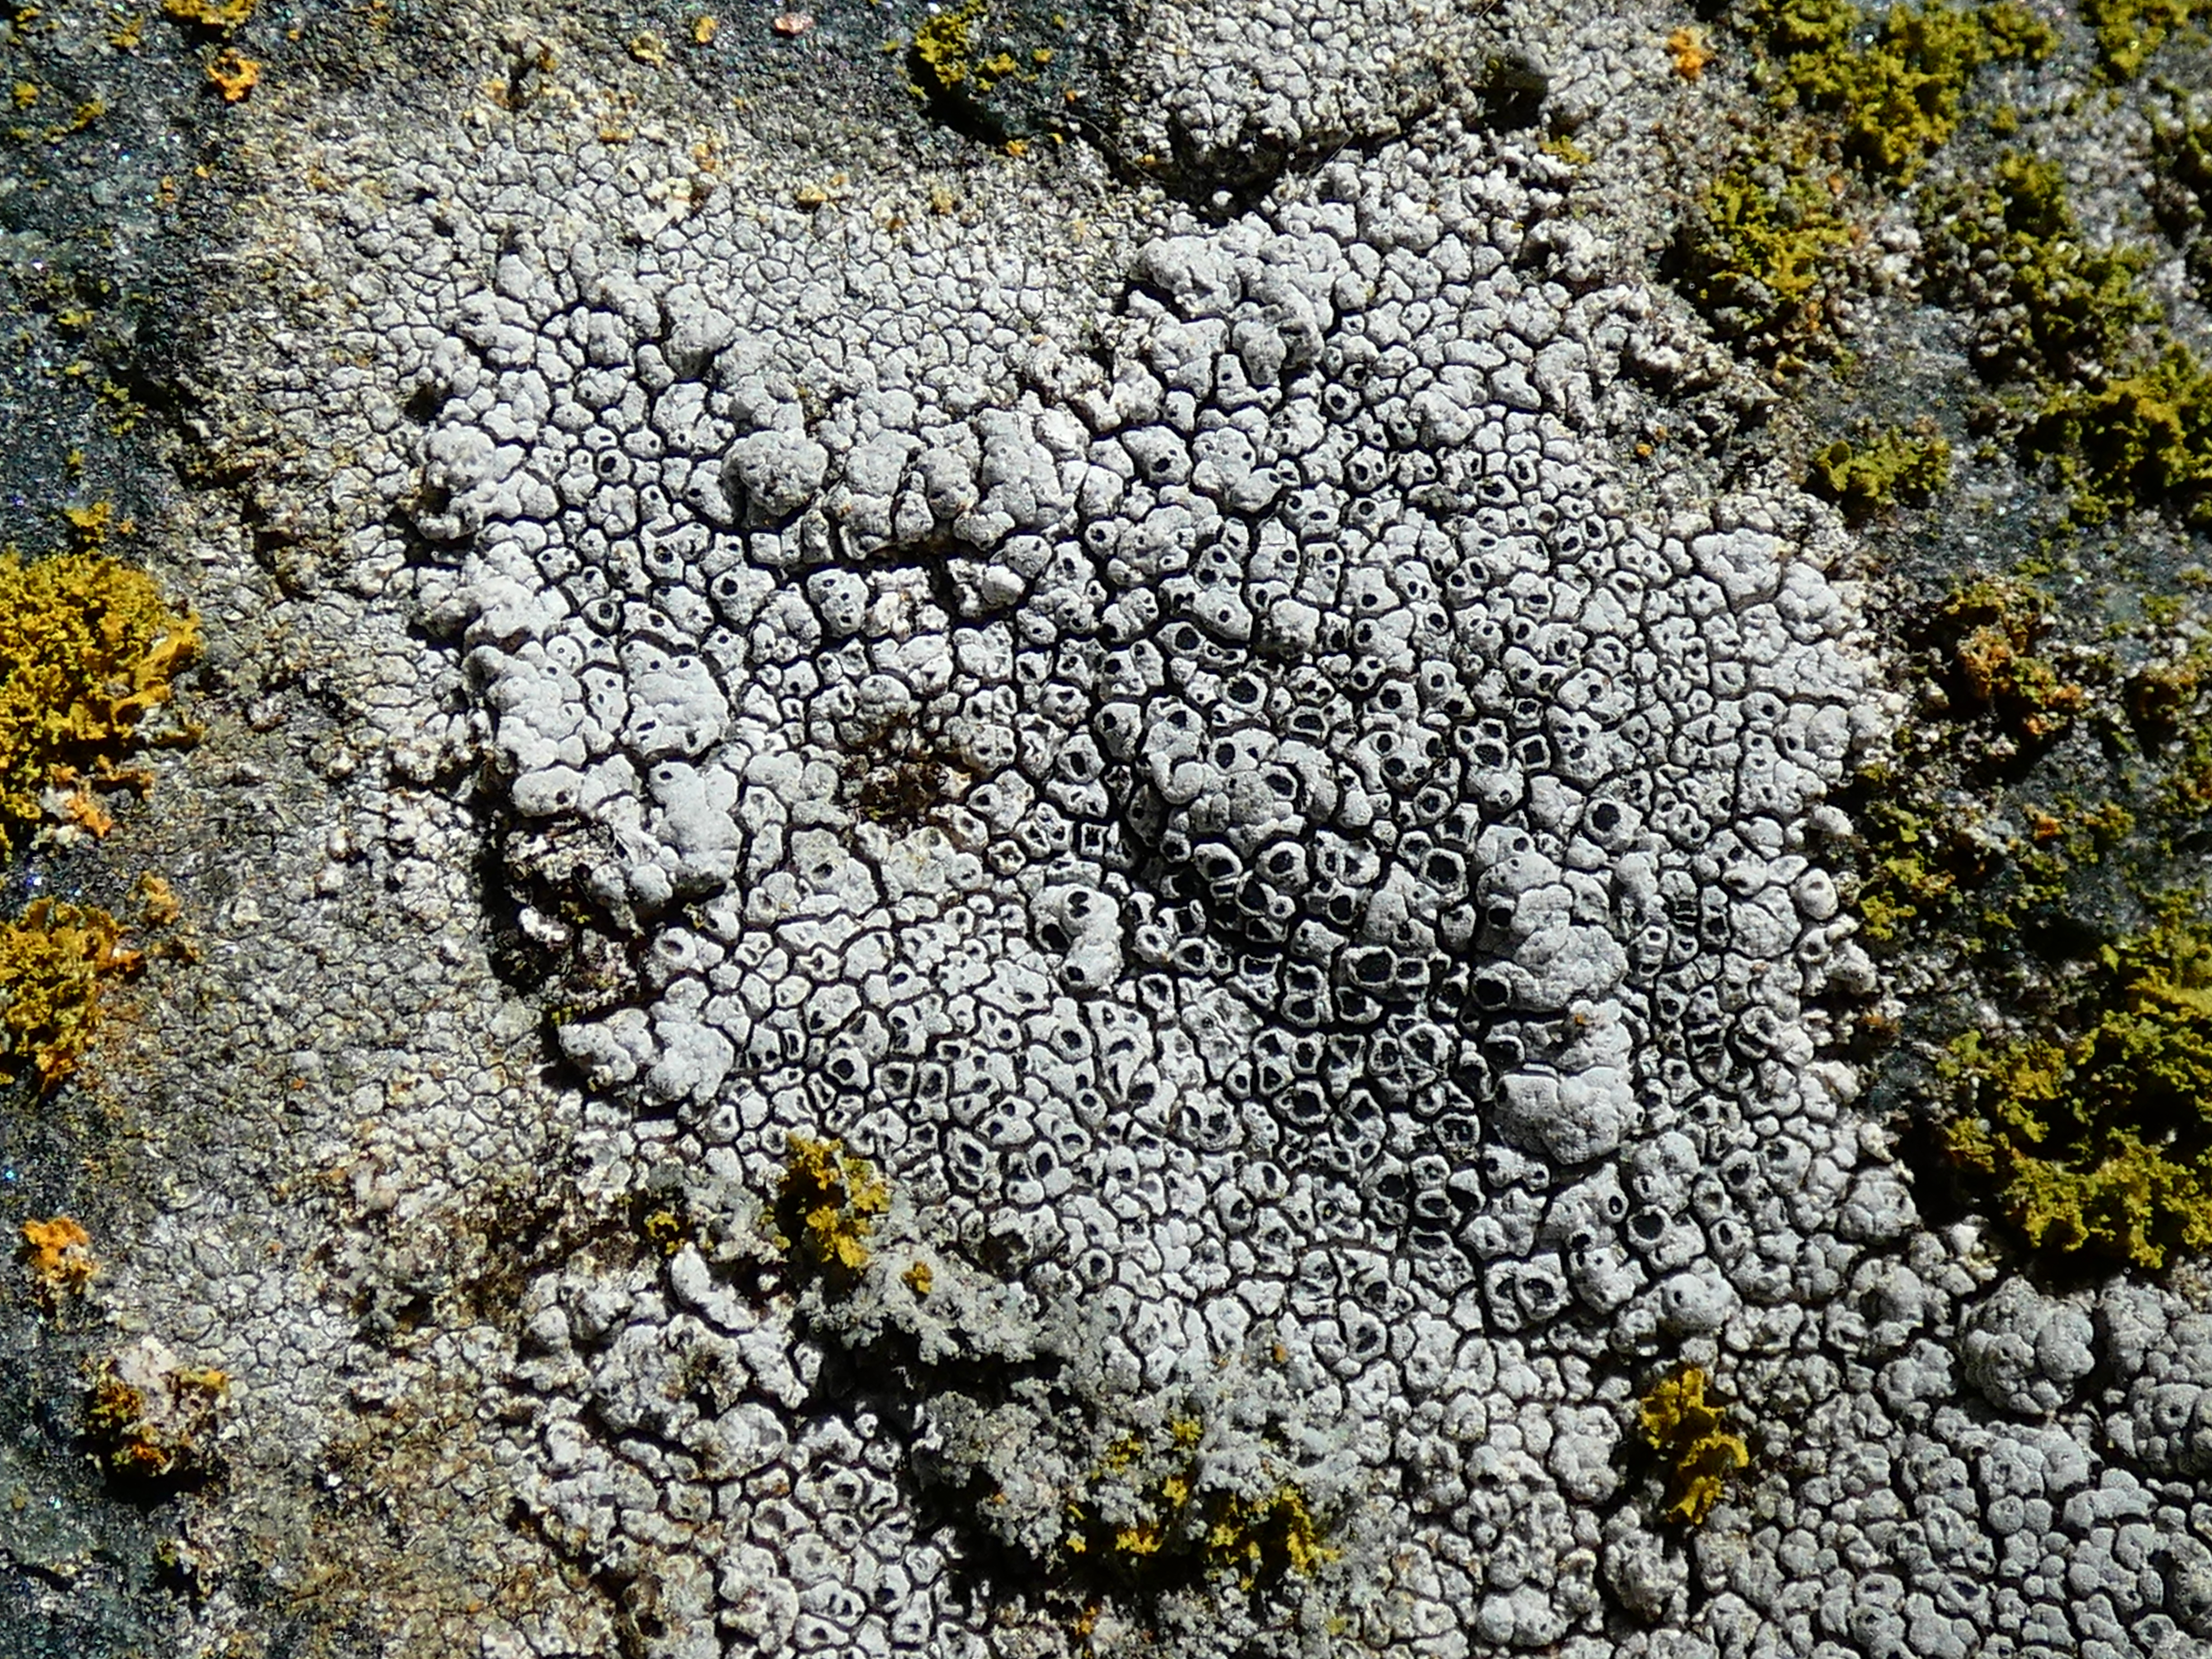 A crustose lichen growing on a rock